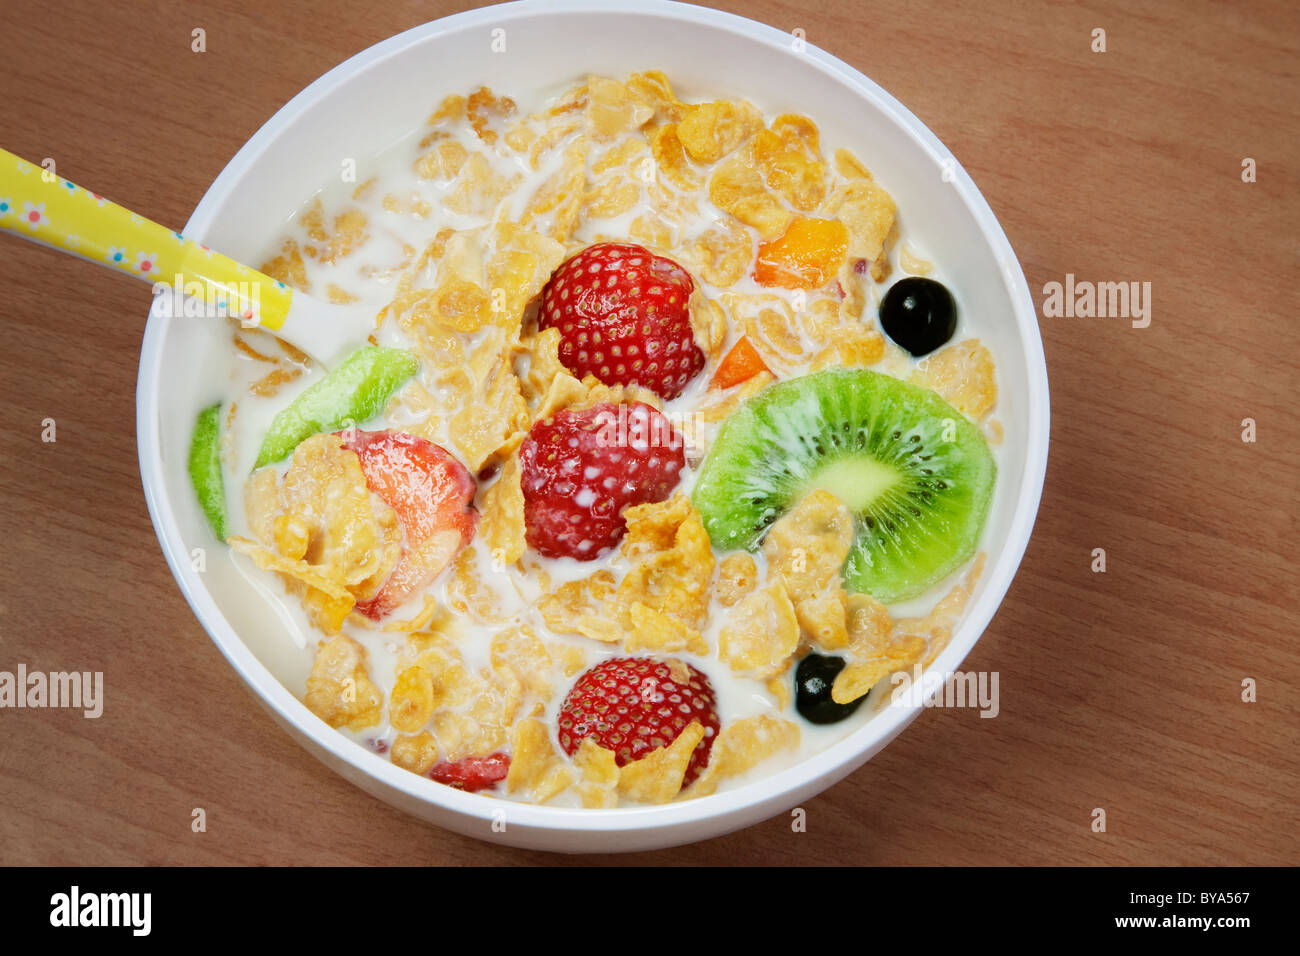 Breakfast cereal in a bowl Stock Photo